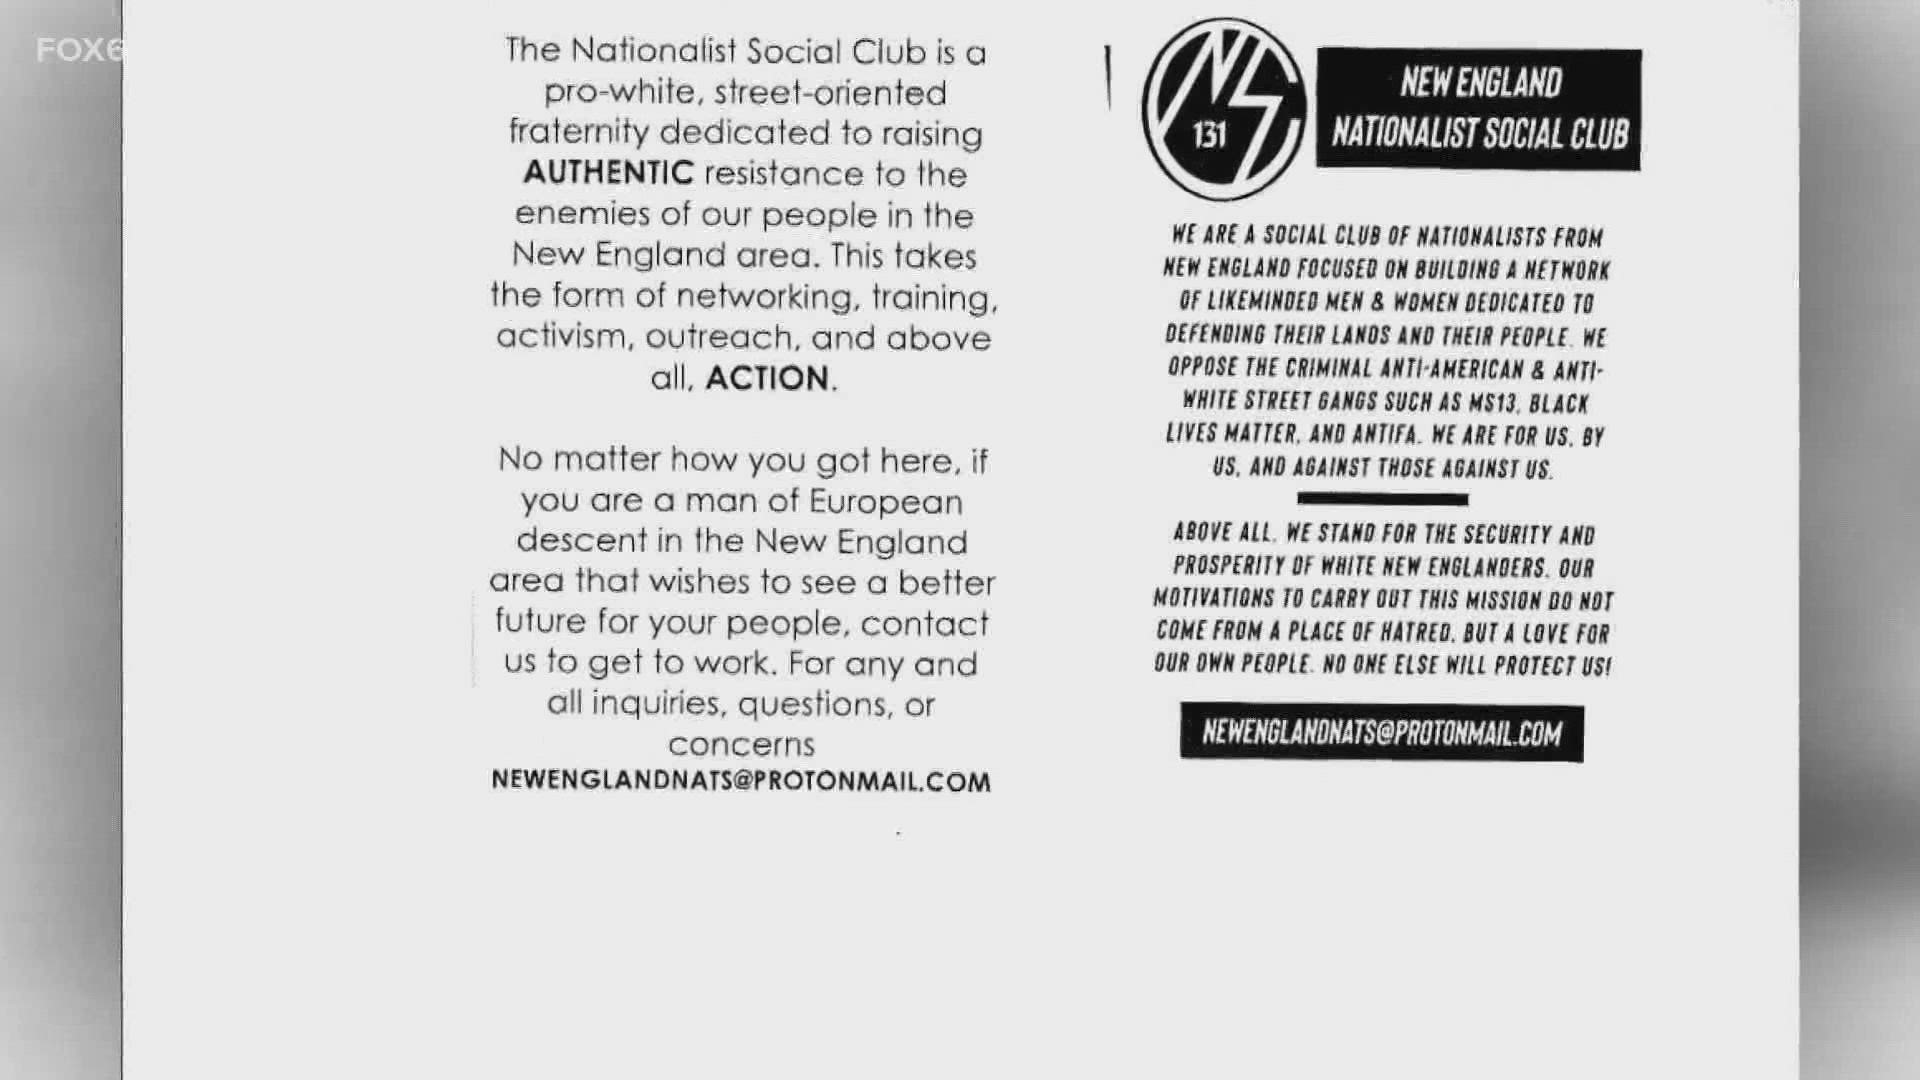 The flyers also turned up in West Hartford and Enfield last month. They attempt to recruit white males.